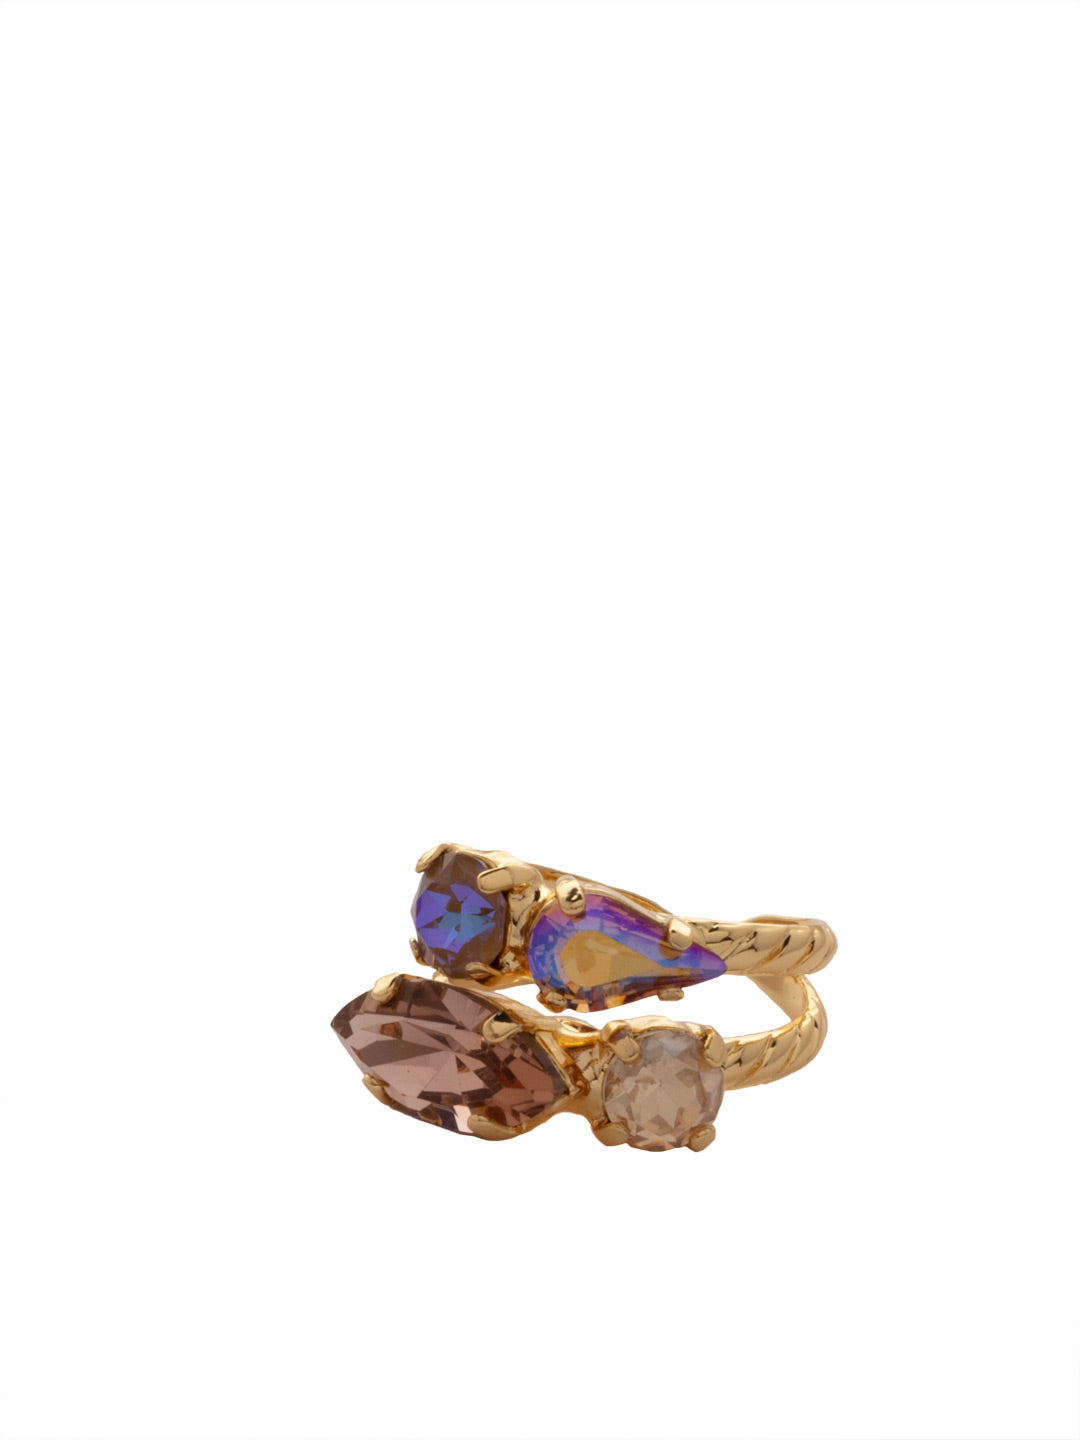 Mayzel Stacked Ring - RET1BGRSU - <p>The Mayzel Stacked Ring goes bold when it comes to sparkle. Slip it on and get flashy with navette, pear and round crystals. From Sorrelli's Raw Sugar collection in our Bright Gold-tone finish.</p>